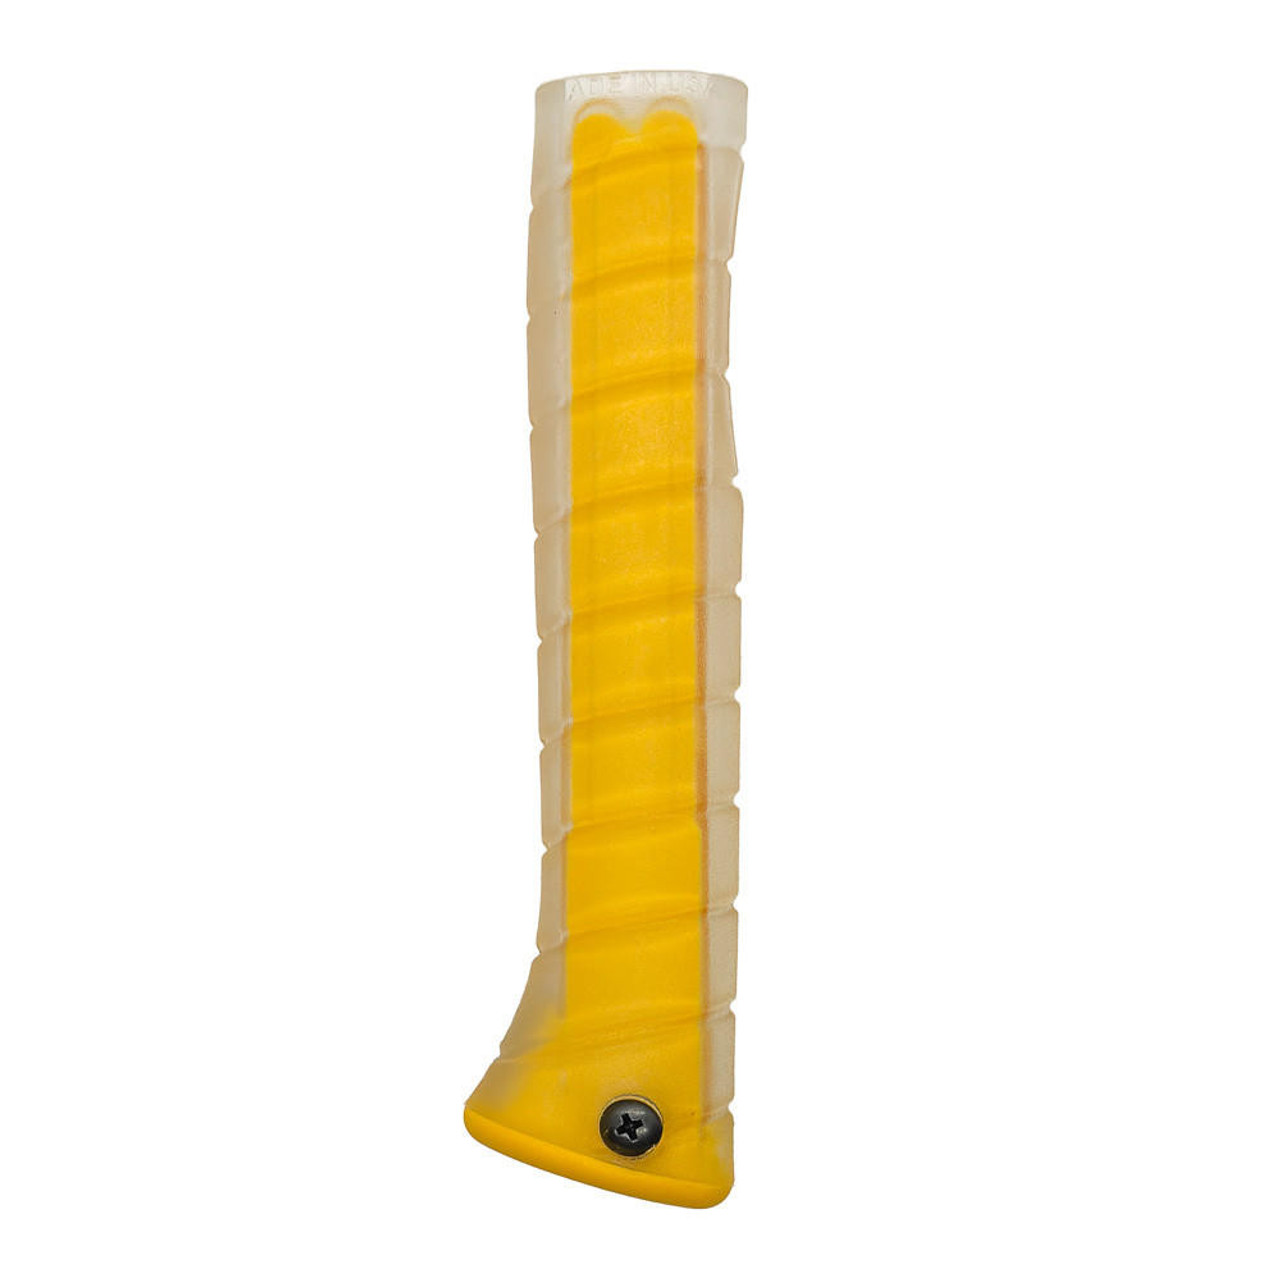 Martinez Tools Martinez Curved Grip M1/M4 Clear Overlay/Yellow Insert